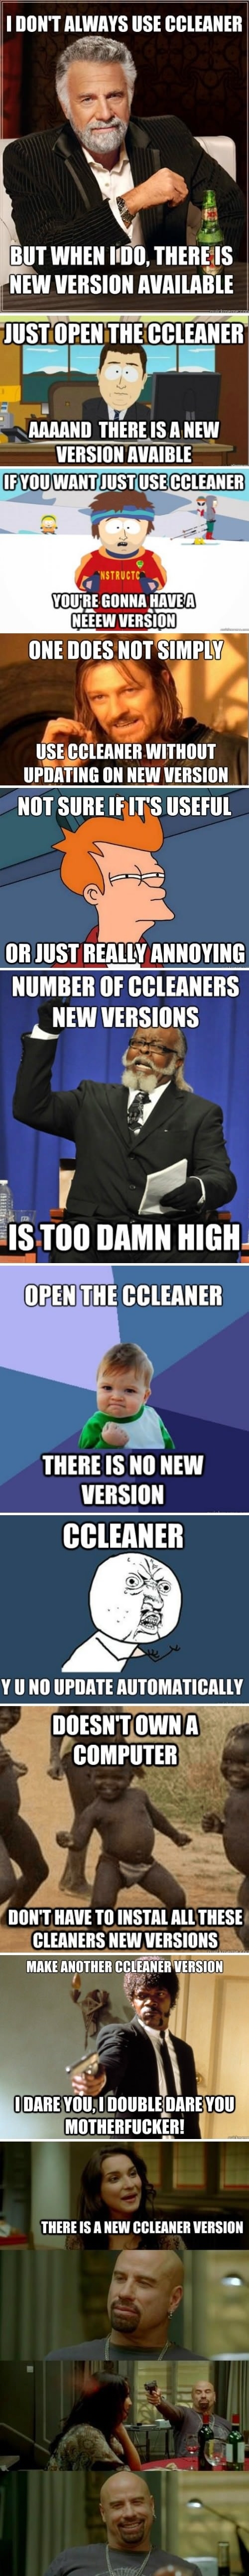 CCleaner's users will know